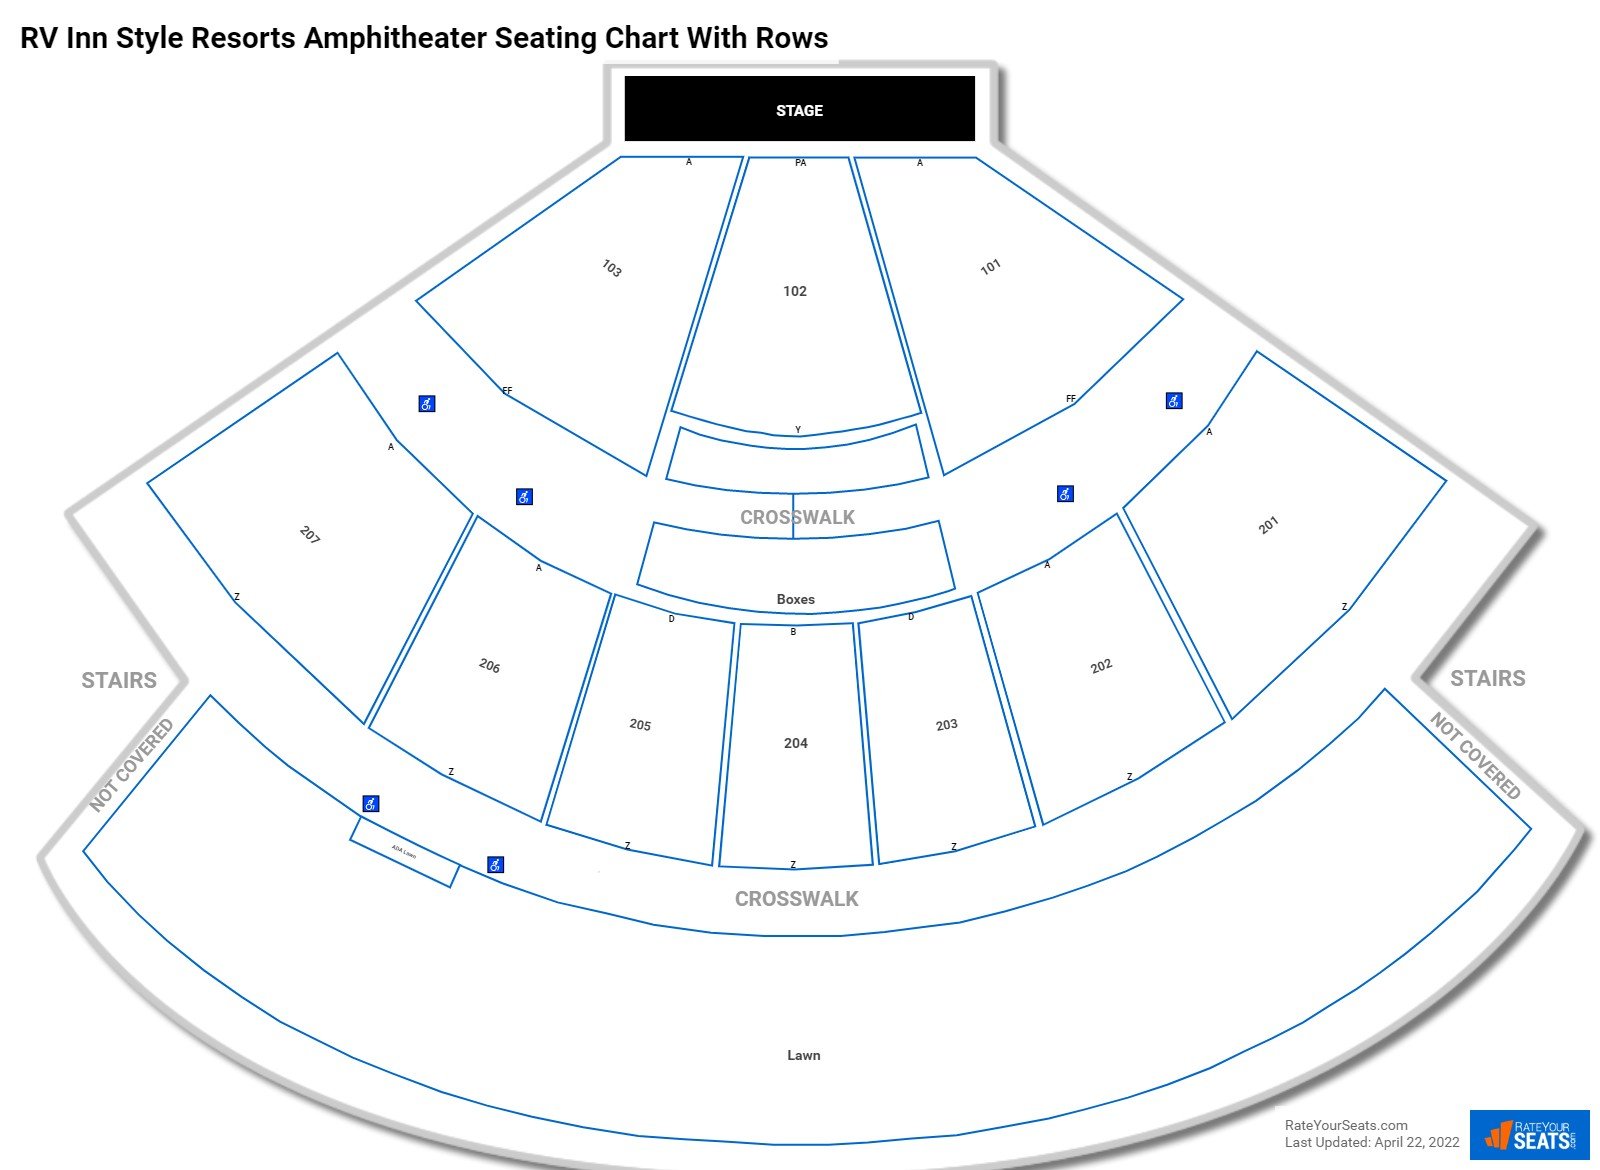 RV Inn Style Resorts Amphitheater seating chart with row numbers